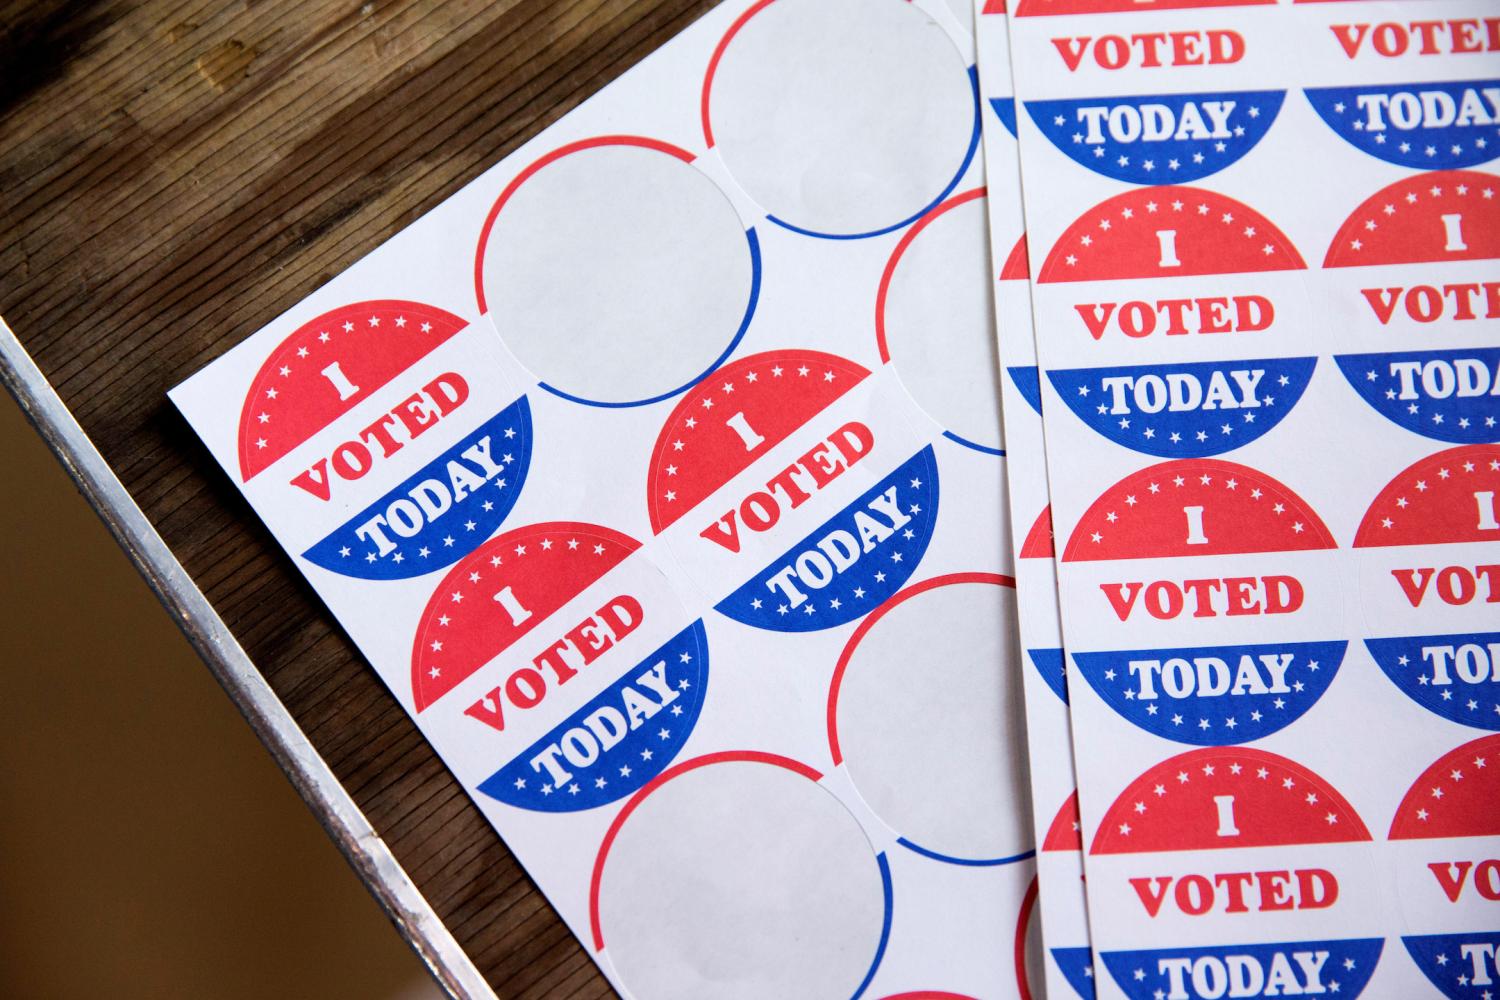 FILE PHOTO: Stickers saying "I Voted Today" are given out to voters in the Democratic primary in Philadelphia, Pennsylvania, U.S., June 2, 2020. REUTERS/Rachel Wisniewski/File Photo